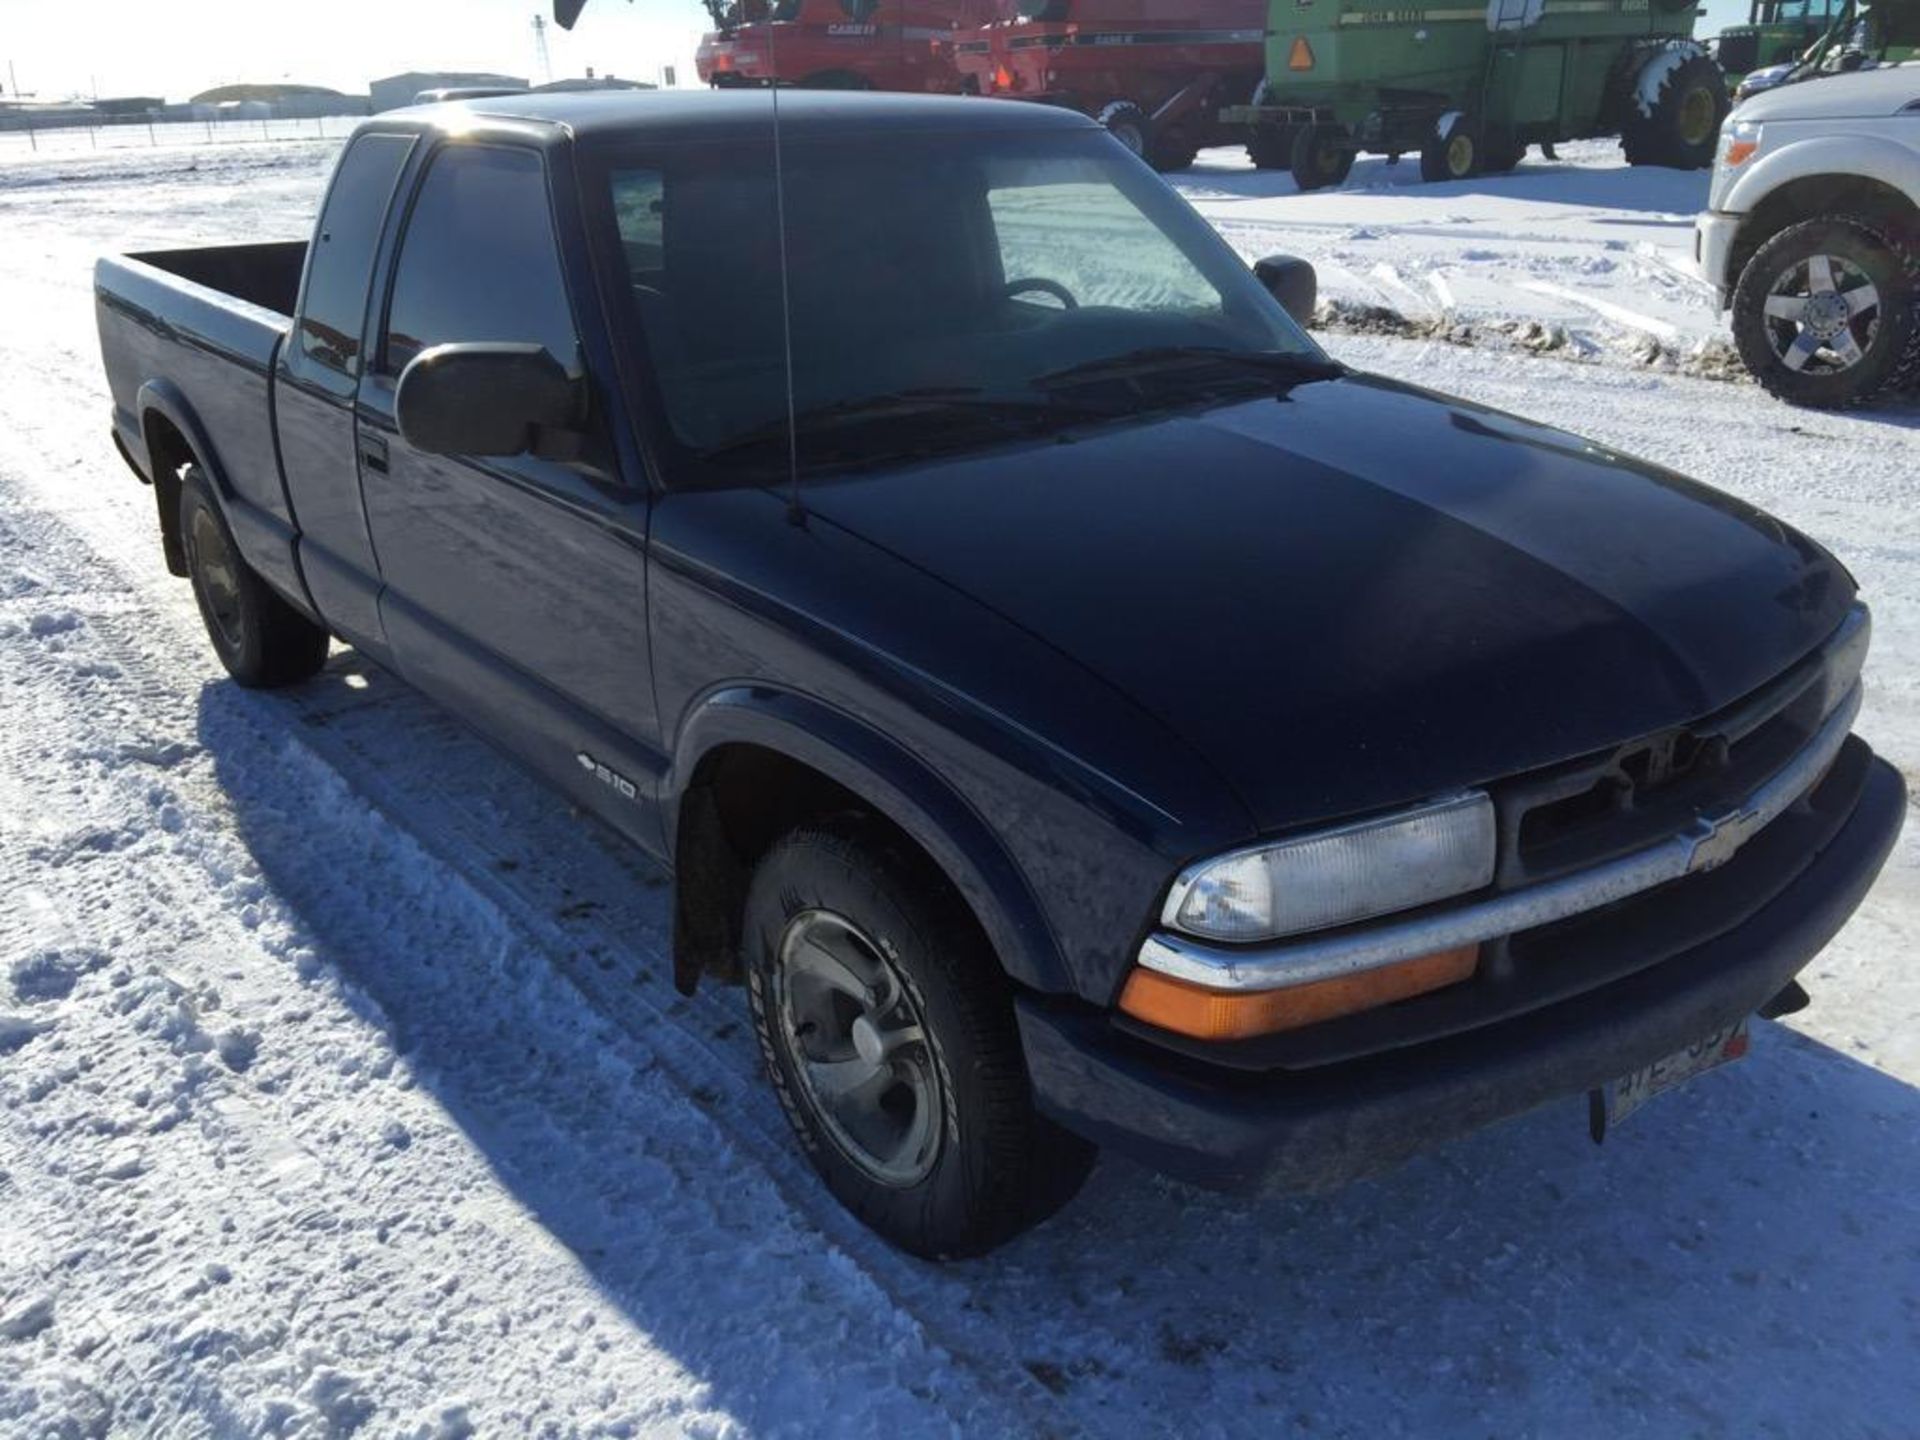 1998 Chevy S10 2WD 190,000 miles - Image 2 of 4